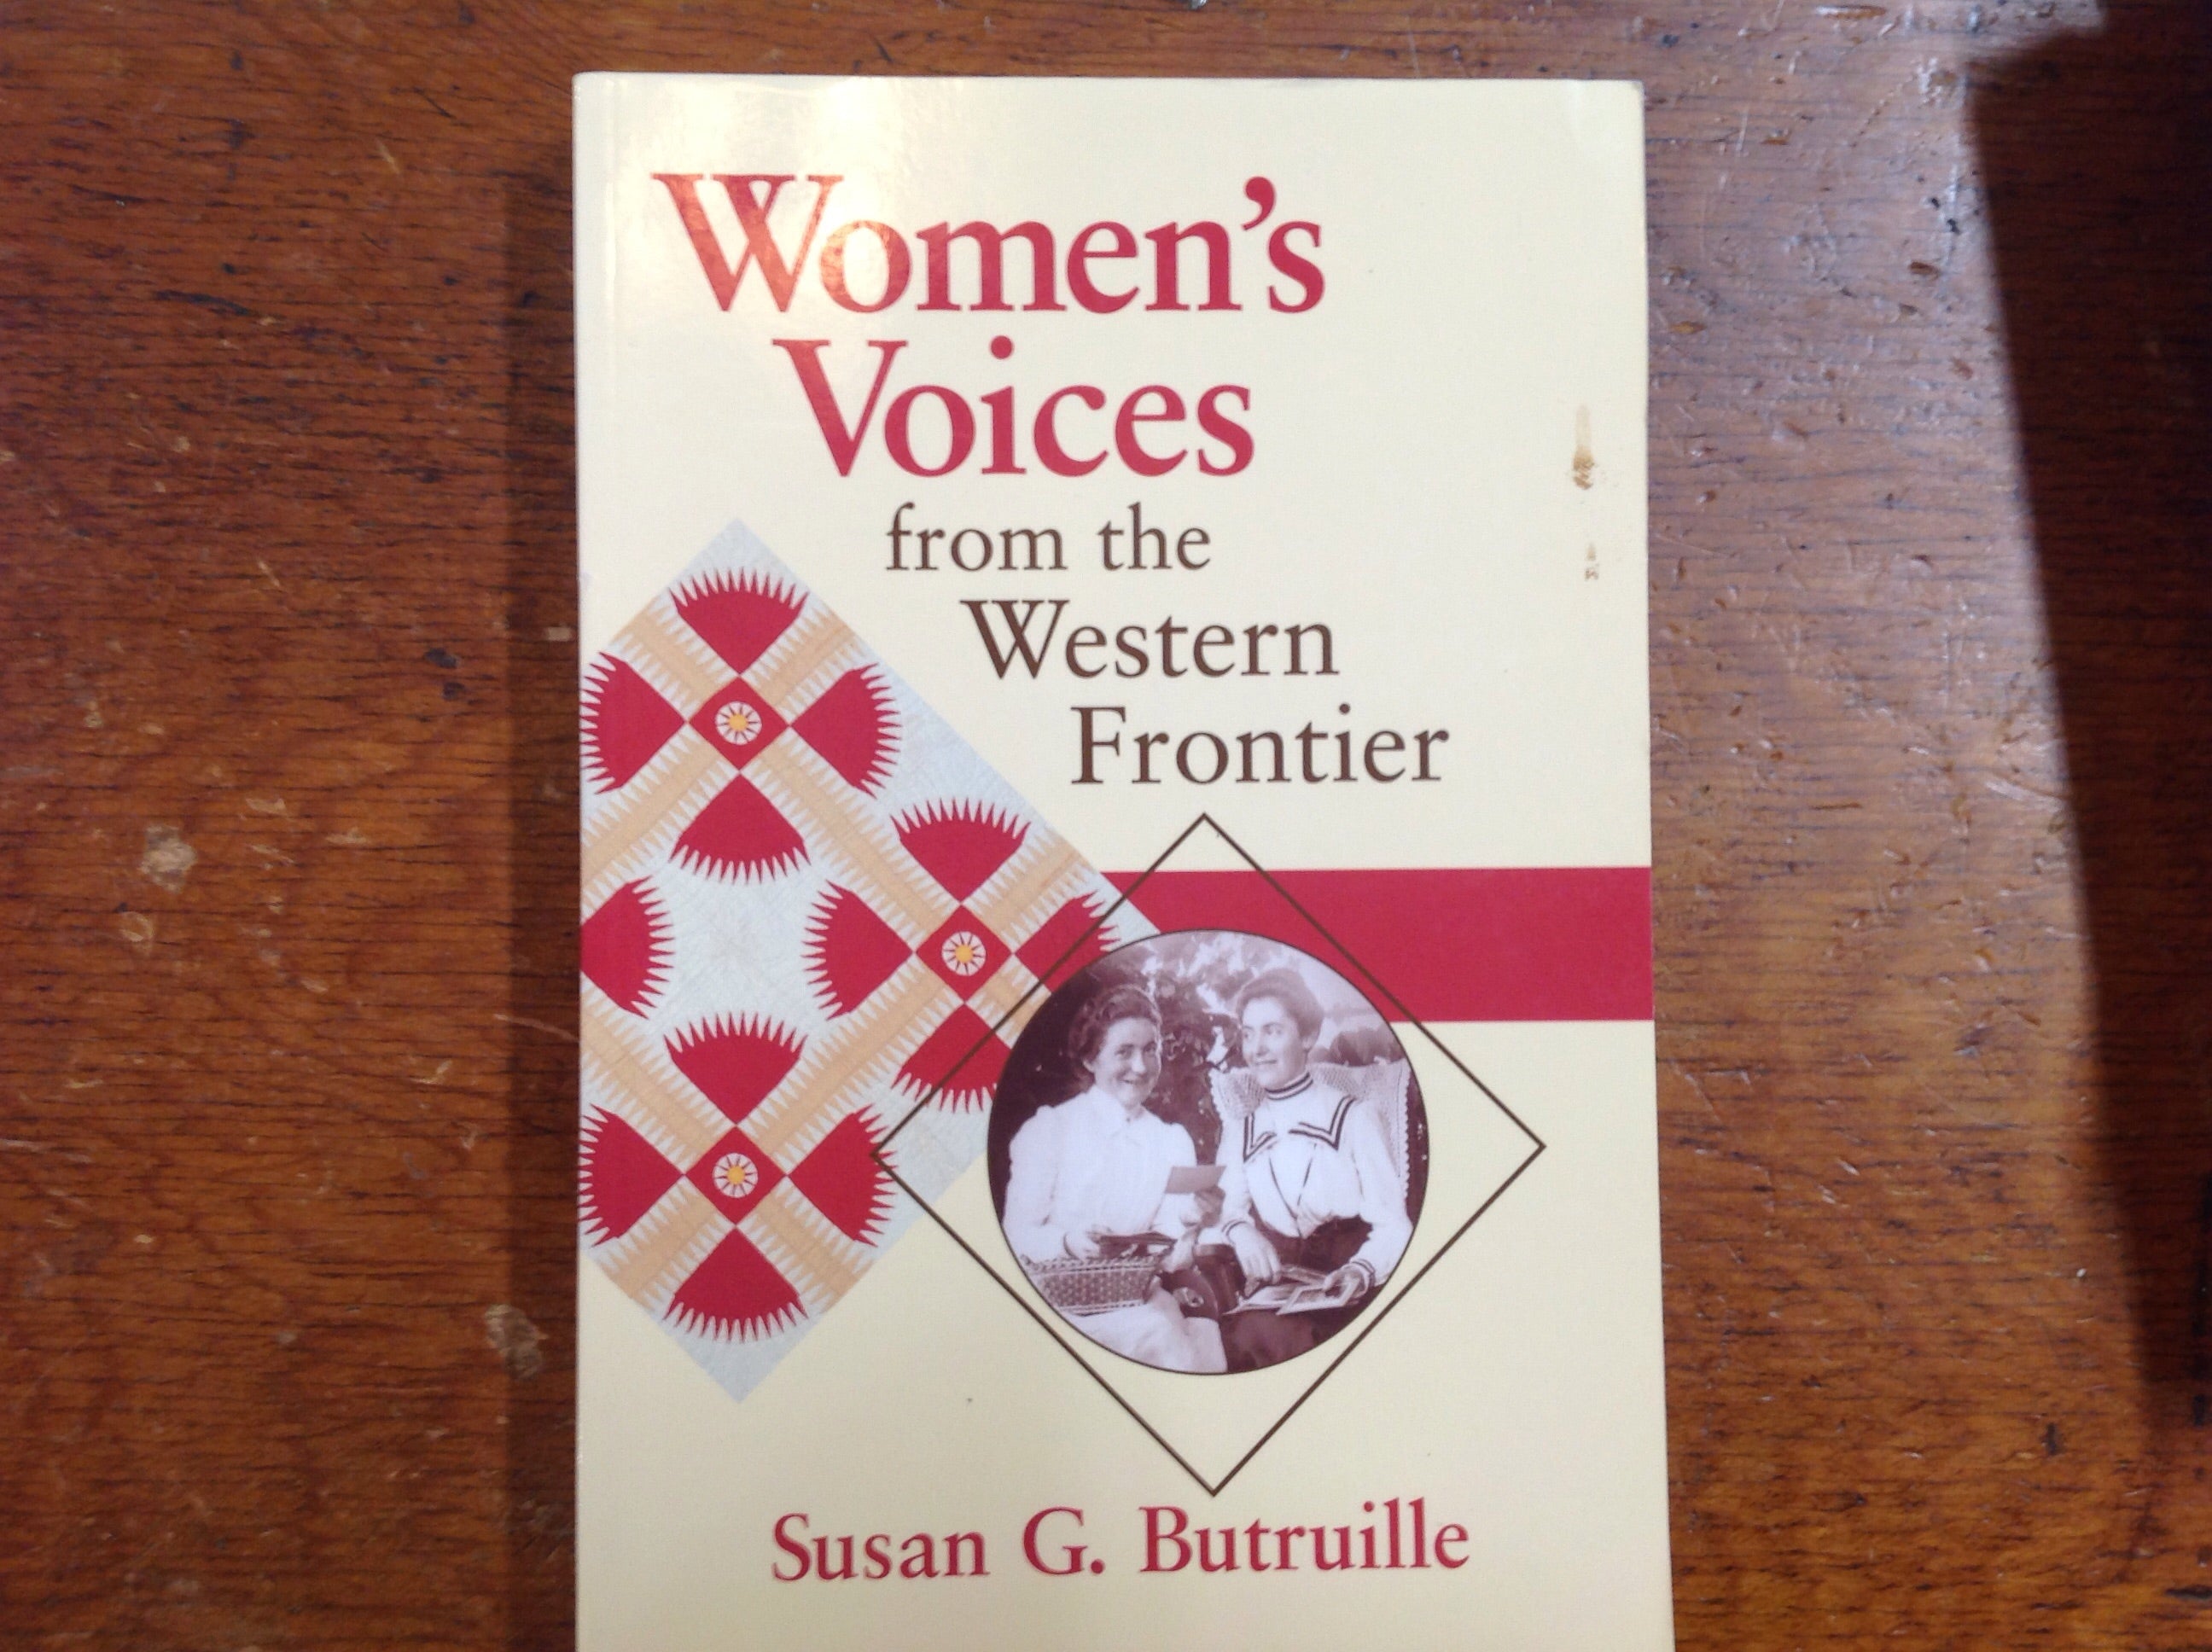 BOOKS - Women's Voices from the Western Frontier